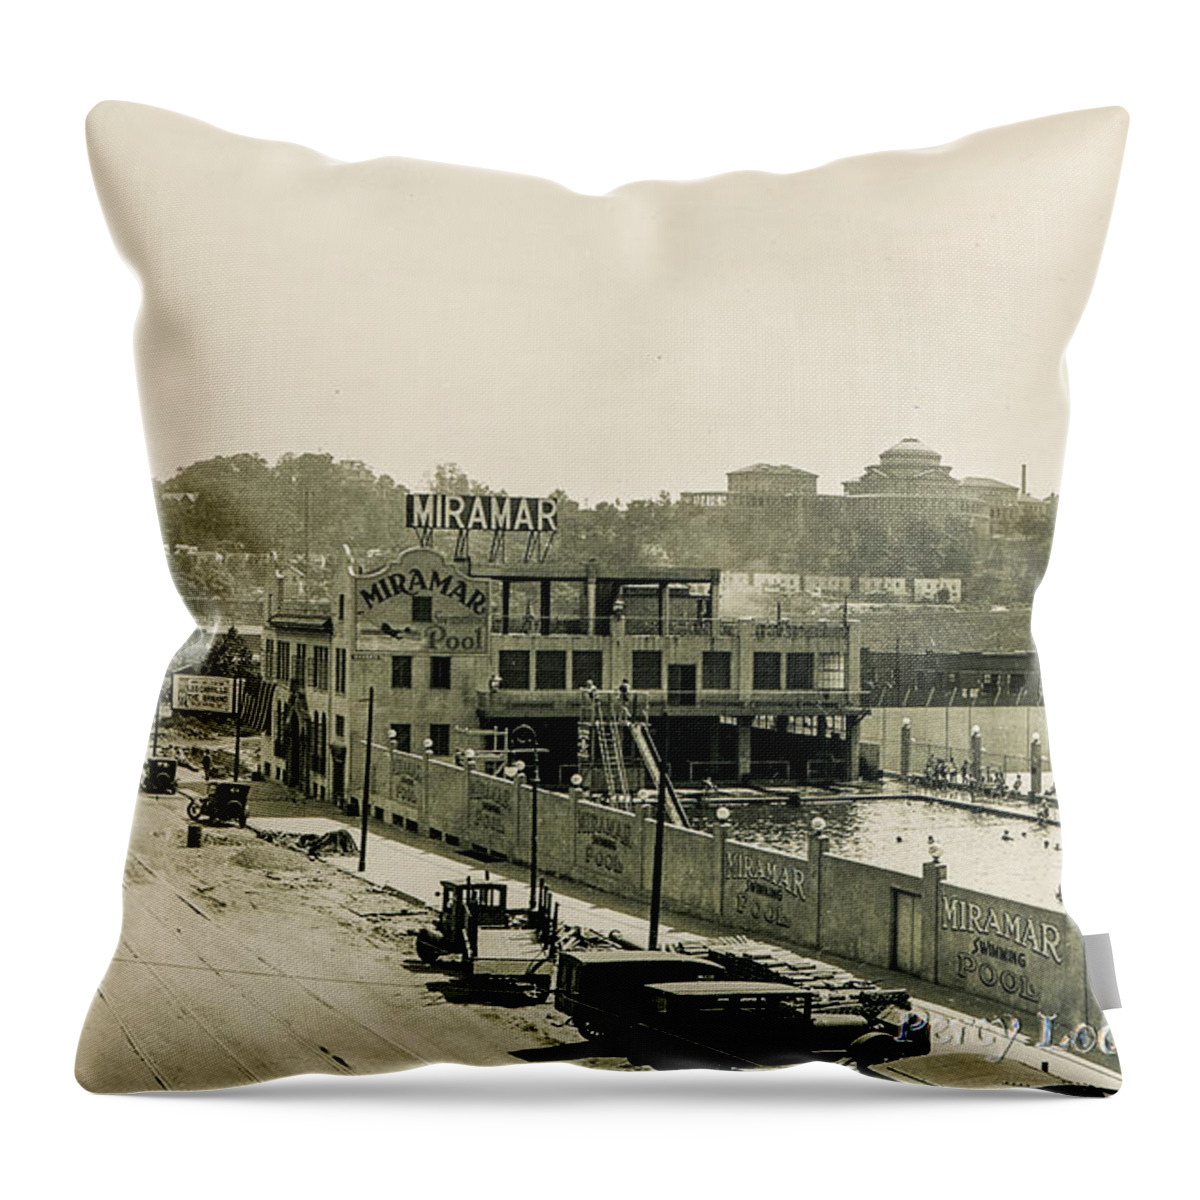 Miramar Throw Pillow featuring the photograph Miramar Pool, 1927 by Cole Thompson